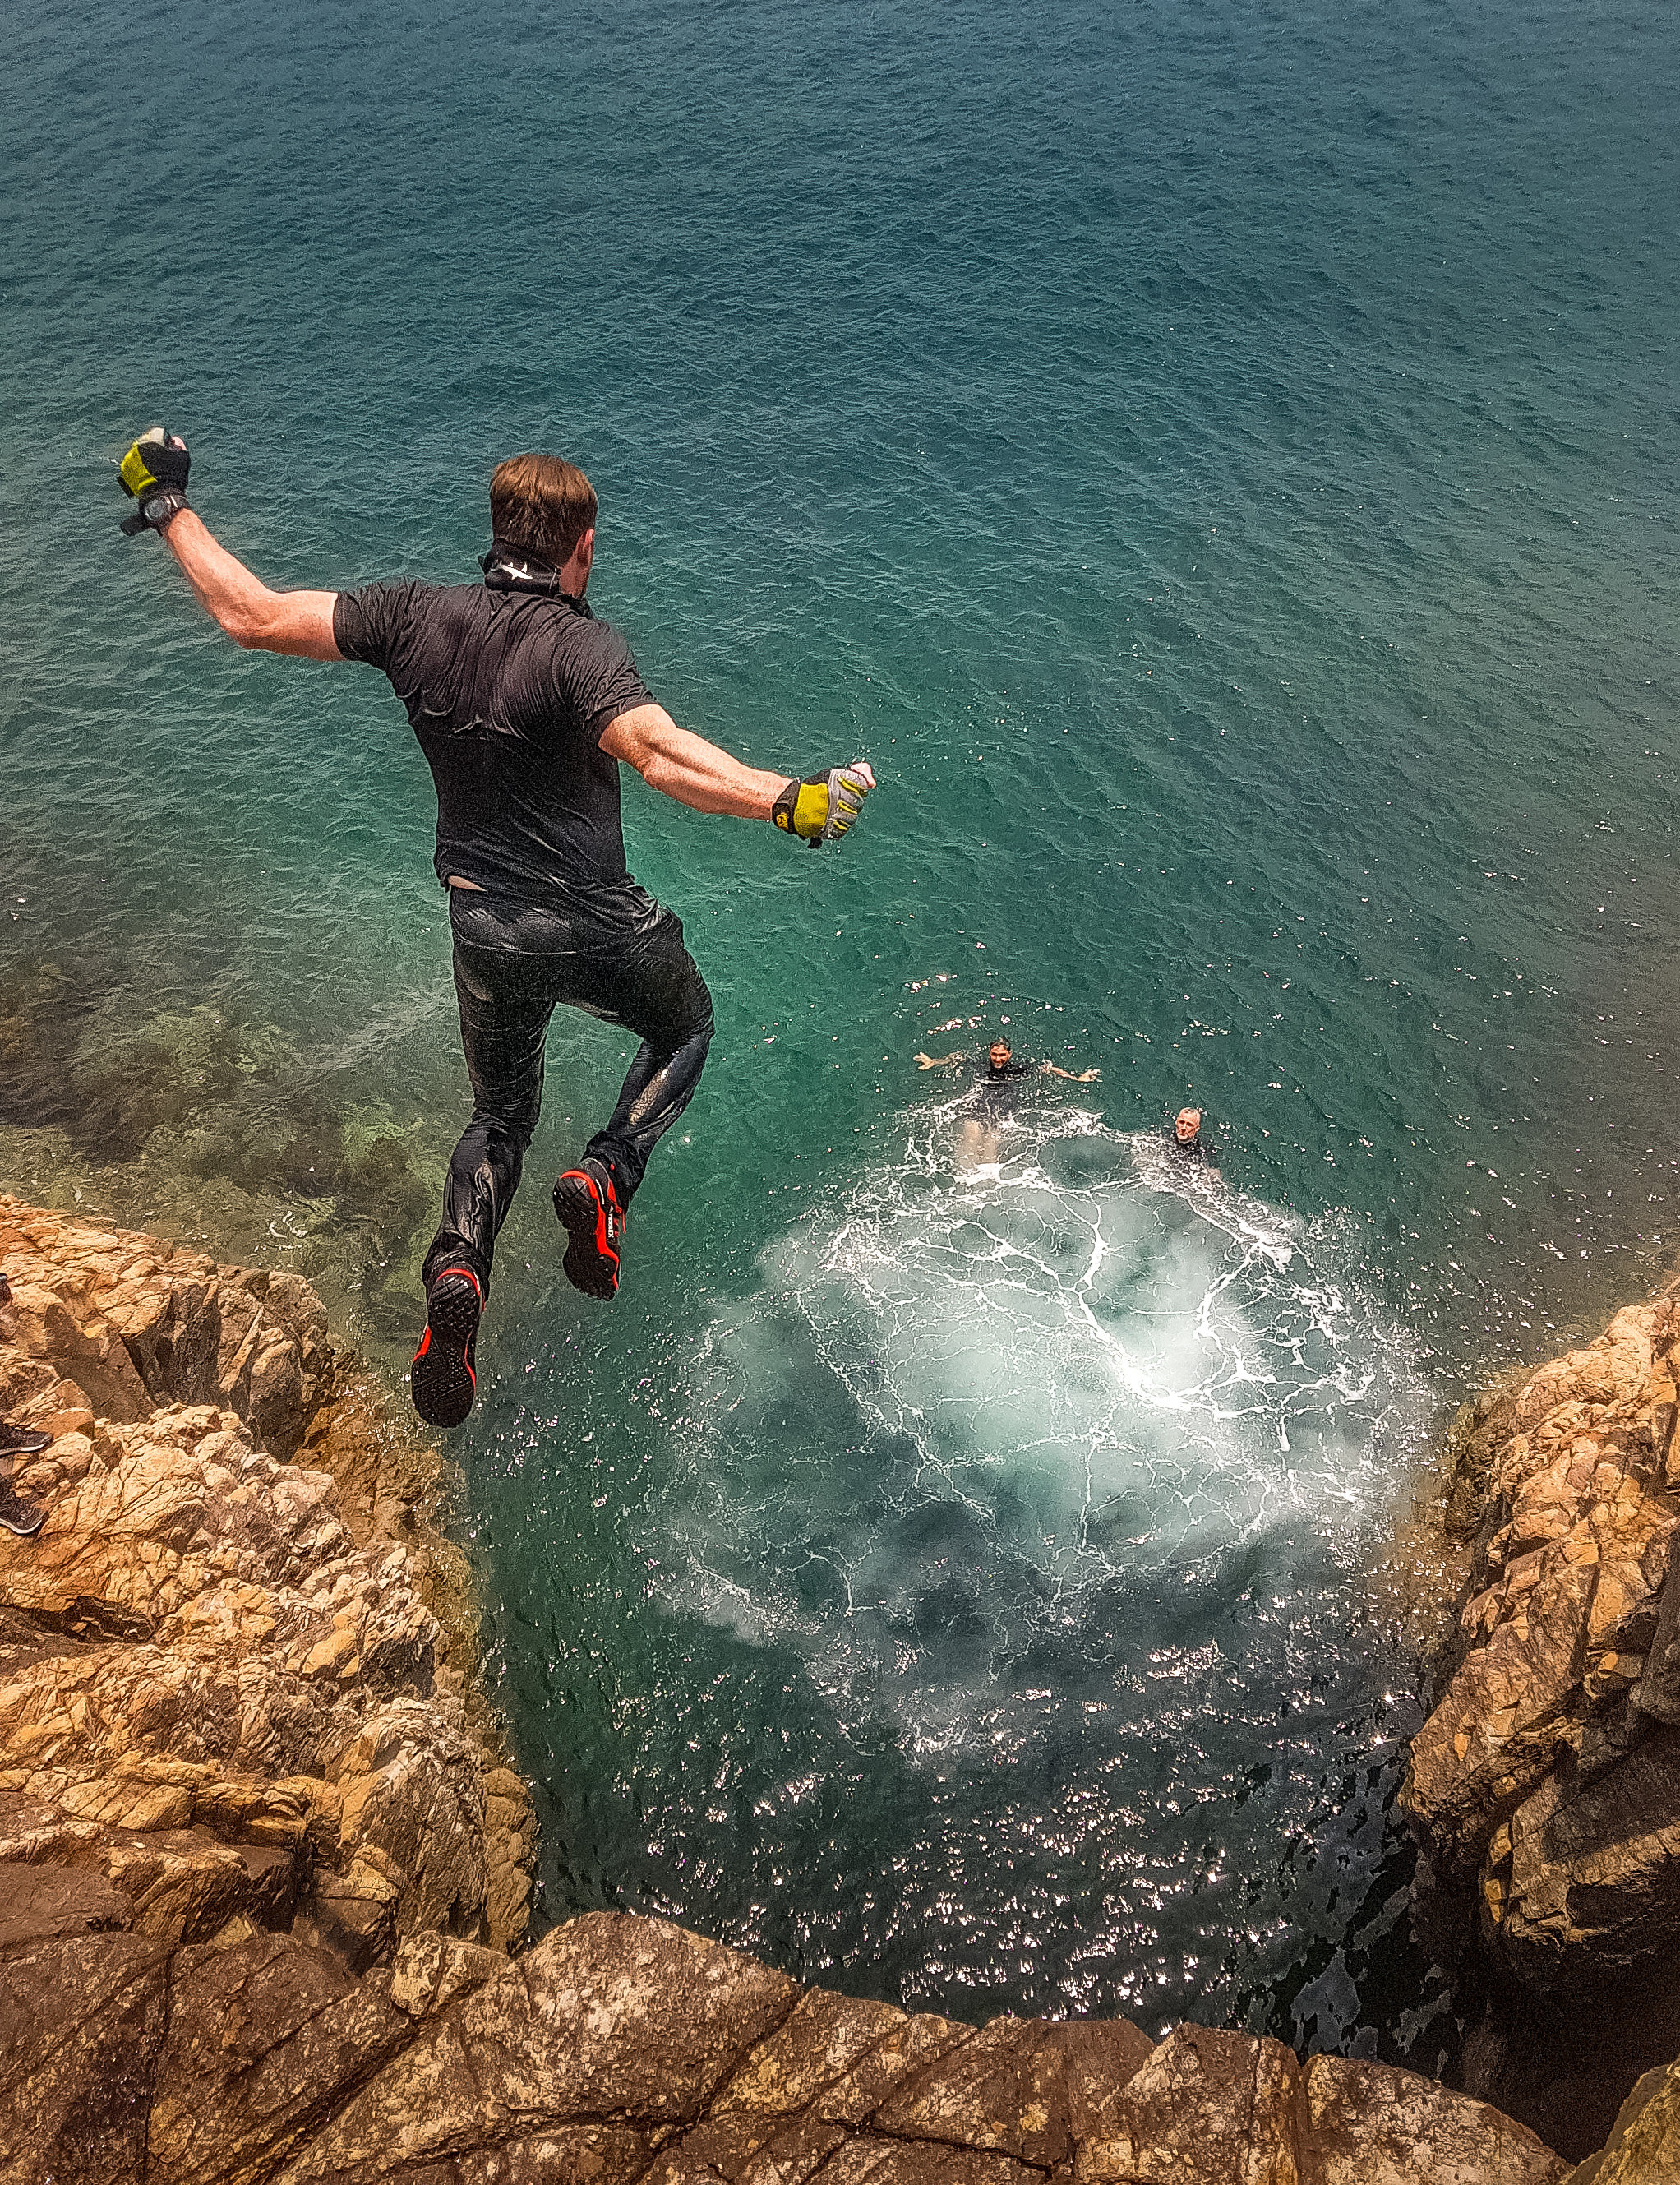 
British-born, Hong Kong-based adventure lover Roland Sharman, seen coasteering in Sai Kung, has a fear of heights. “That fear is what introduced me to vertical adventure because I realised that, to find a forward path of empowerment, I would have to face my fear head on,” says Sharman. Photo: Iurgi/HK Outdoor Adventures 